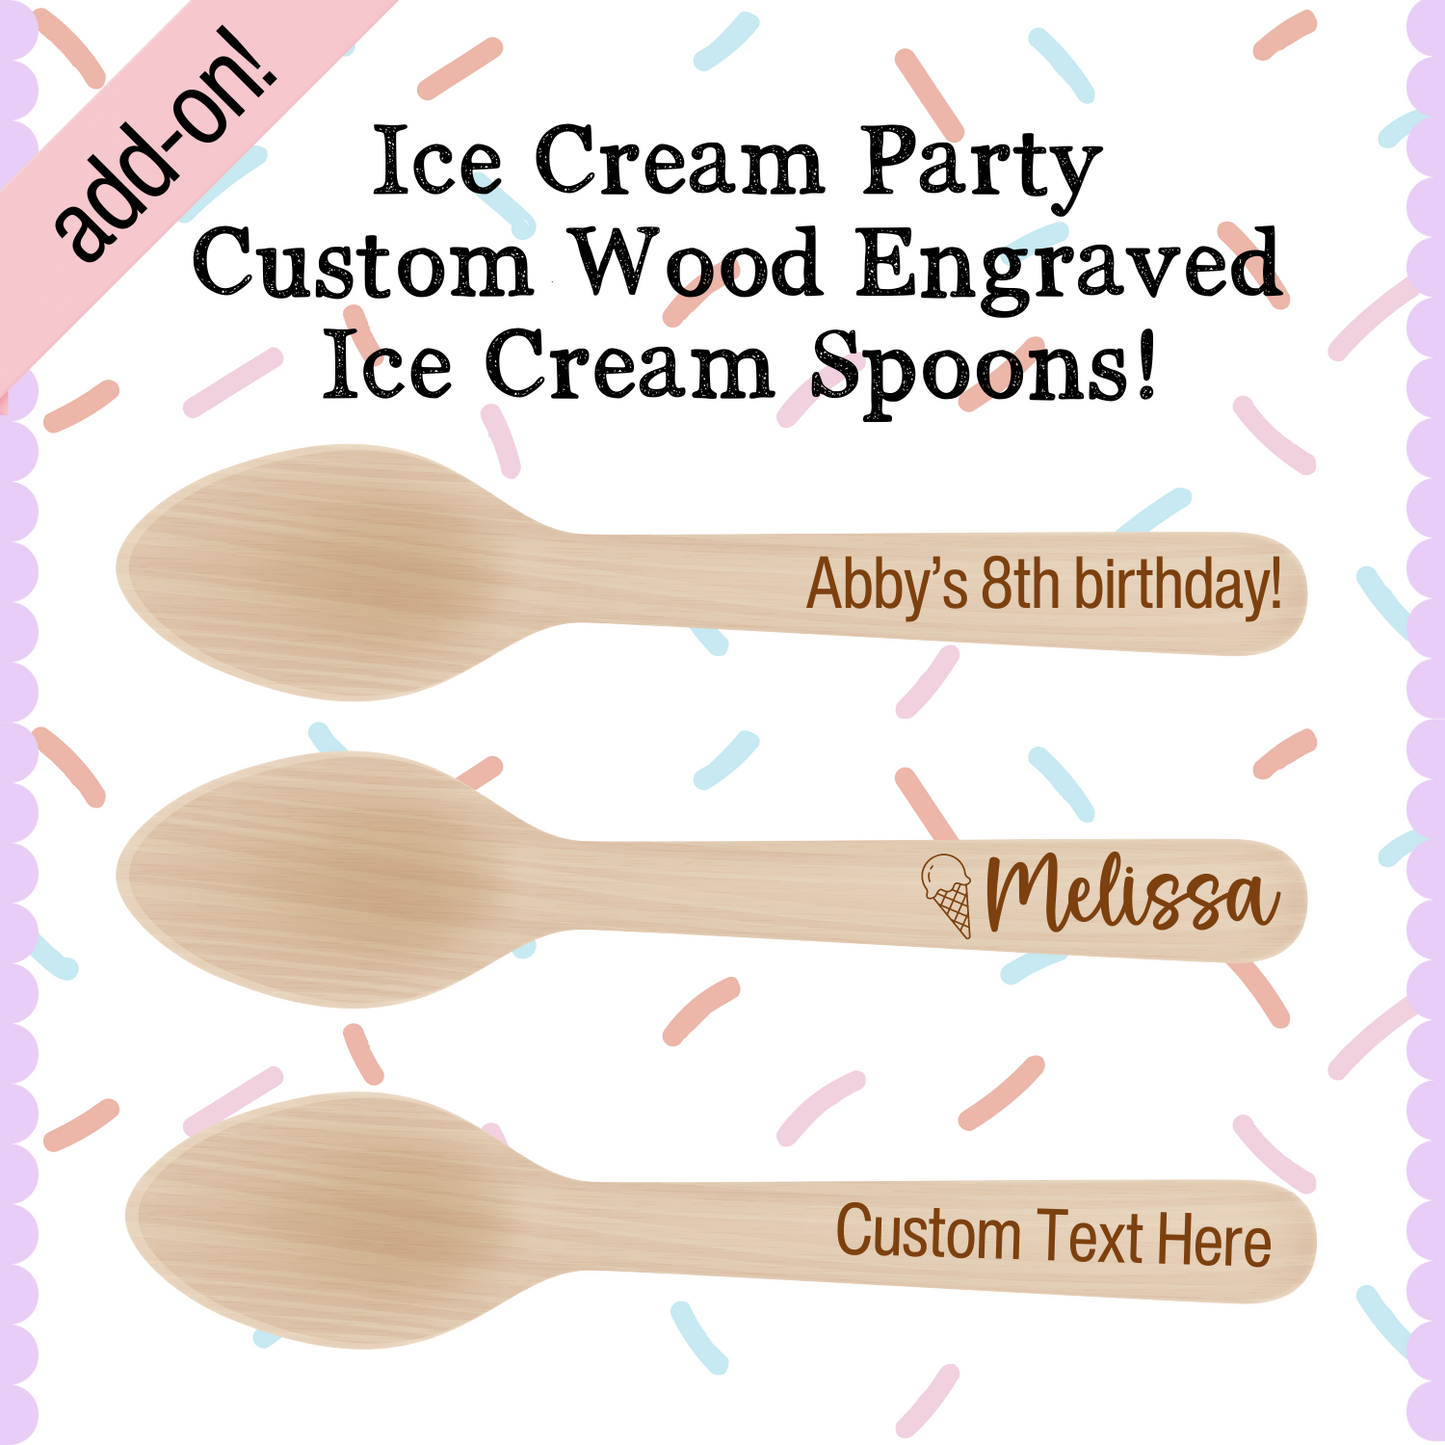 Ice Cream Party Add-on - Custom engraved wood spoons!